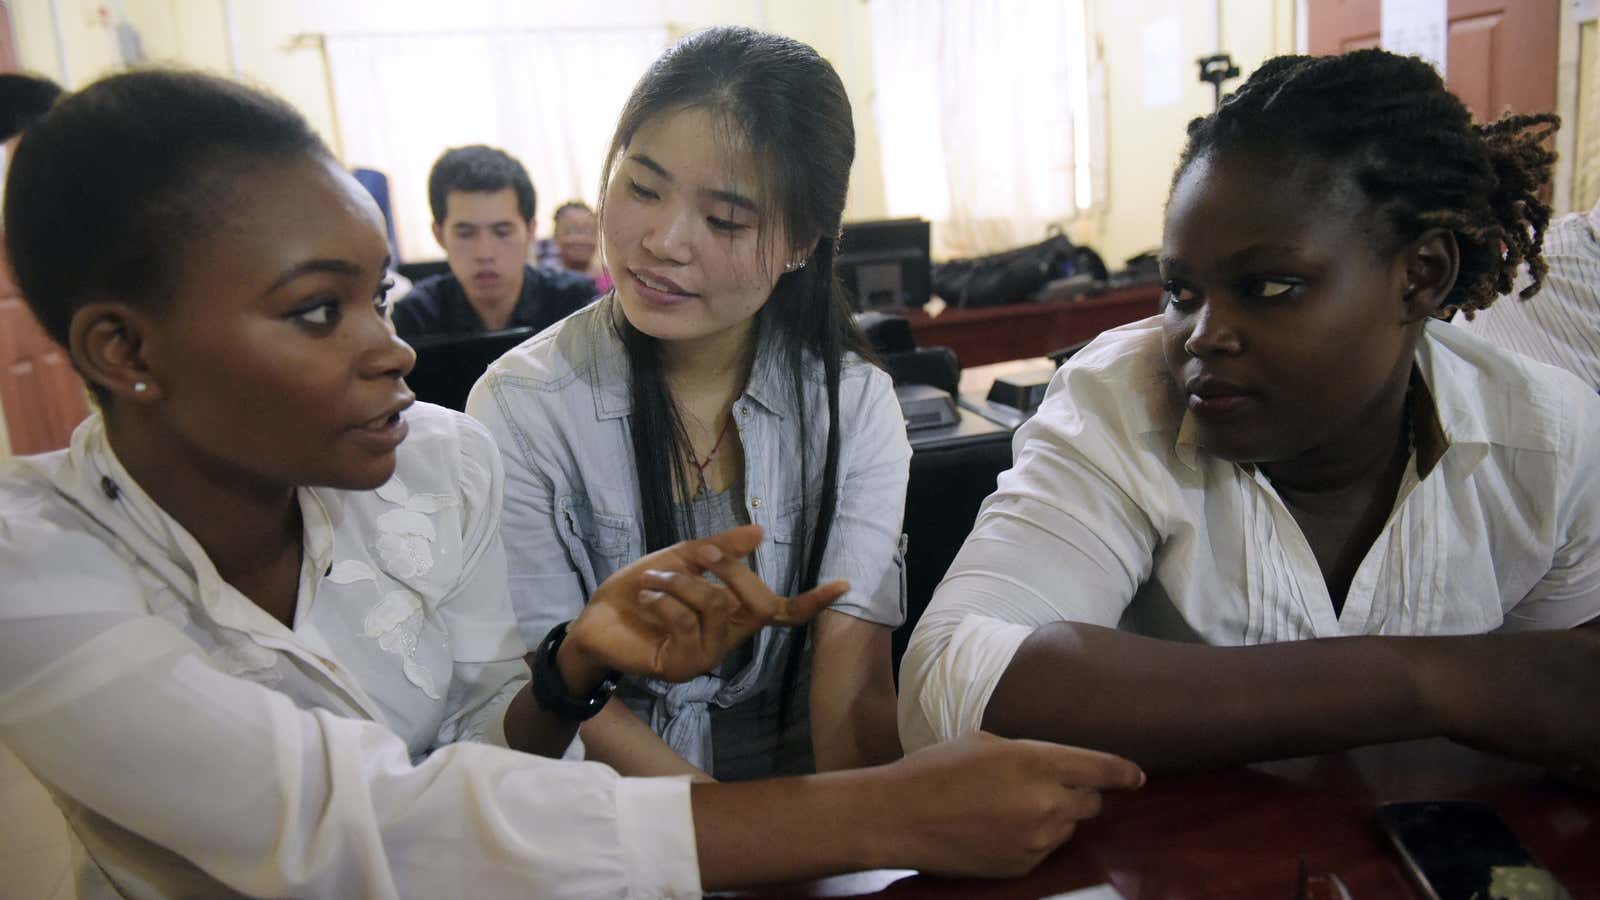 A Chinese language teacher speaks with students at the Confucius Institute at the University of Lagos